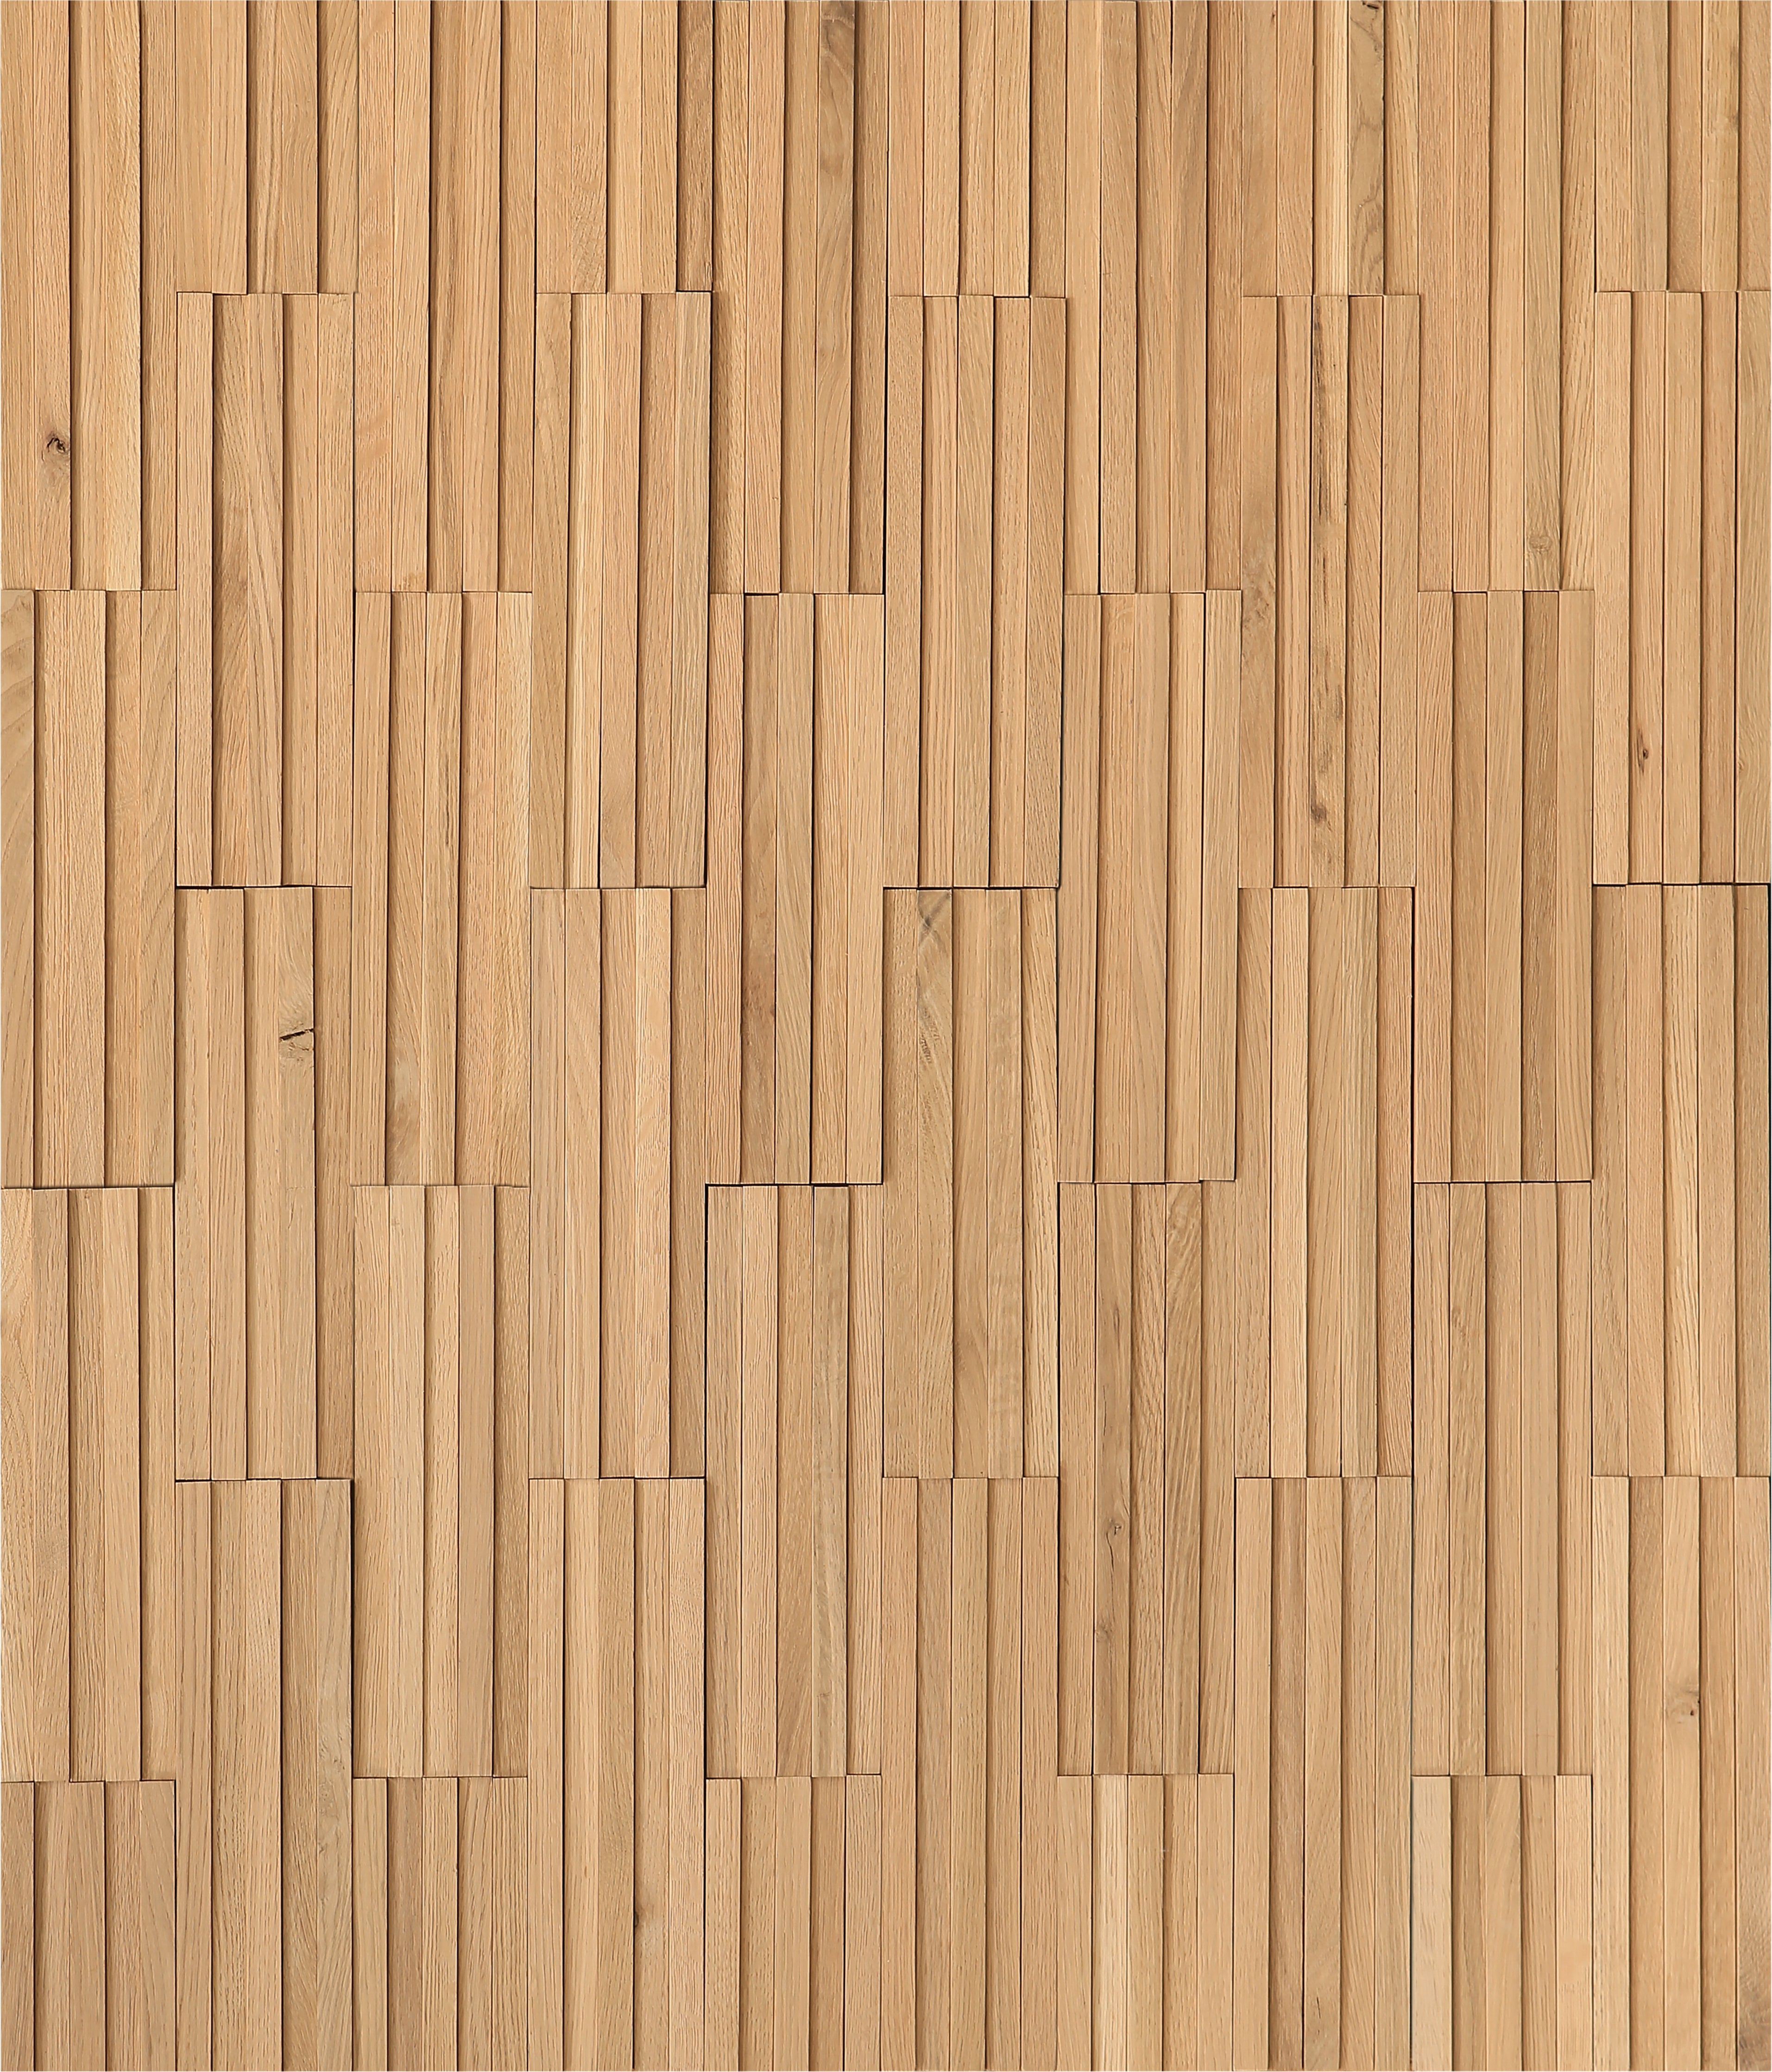 duchateau inceptiv parallels sand oak three dimensional wall natural wood panel lacquer for interior use distributed by surface group international